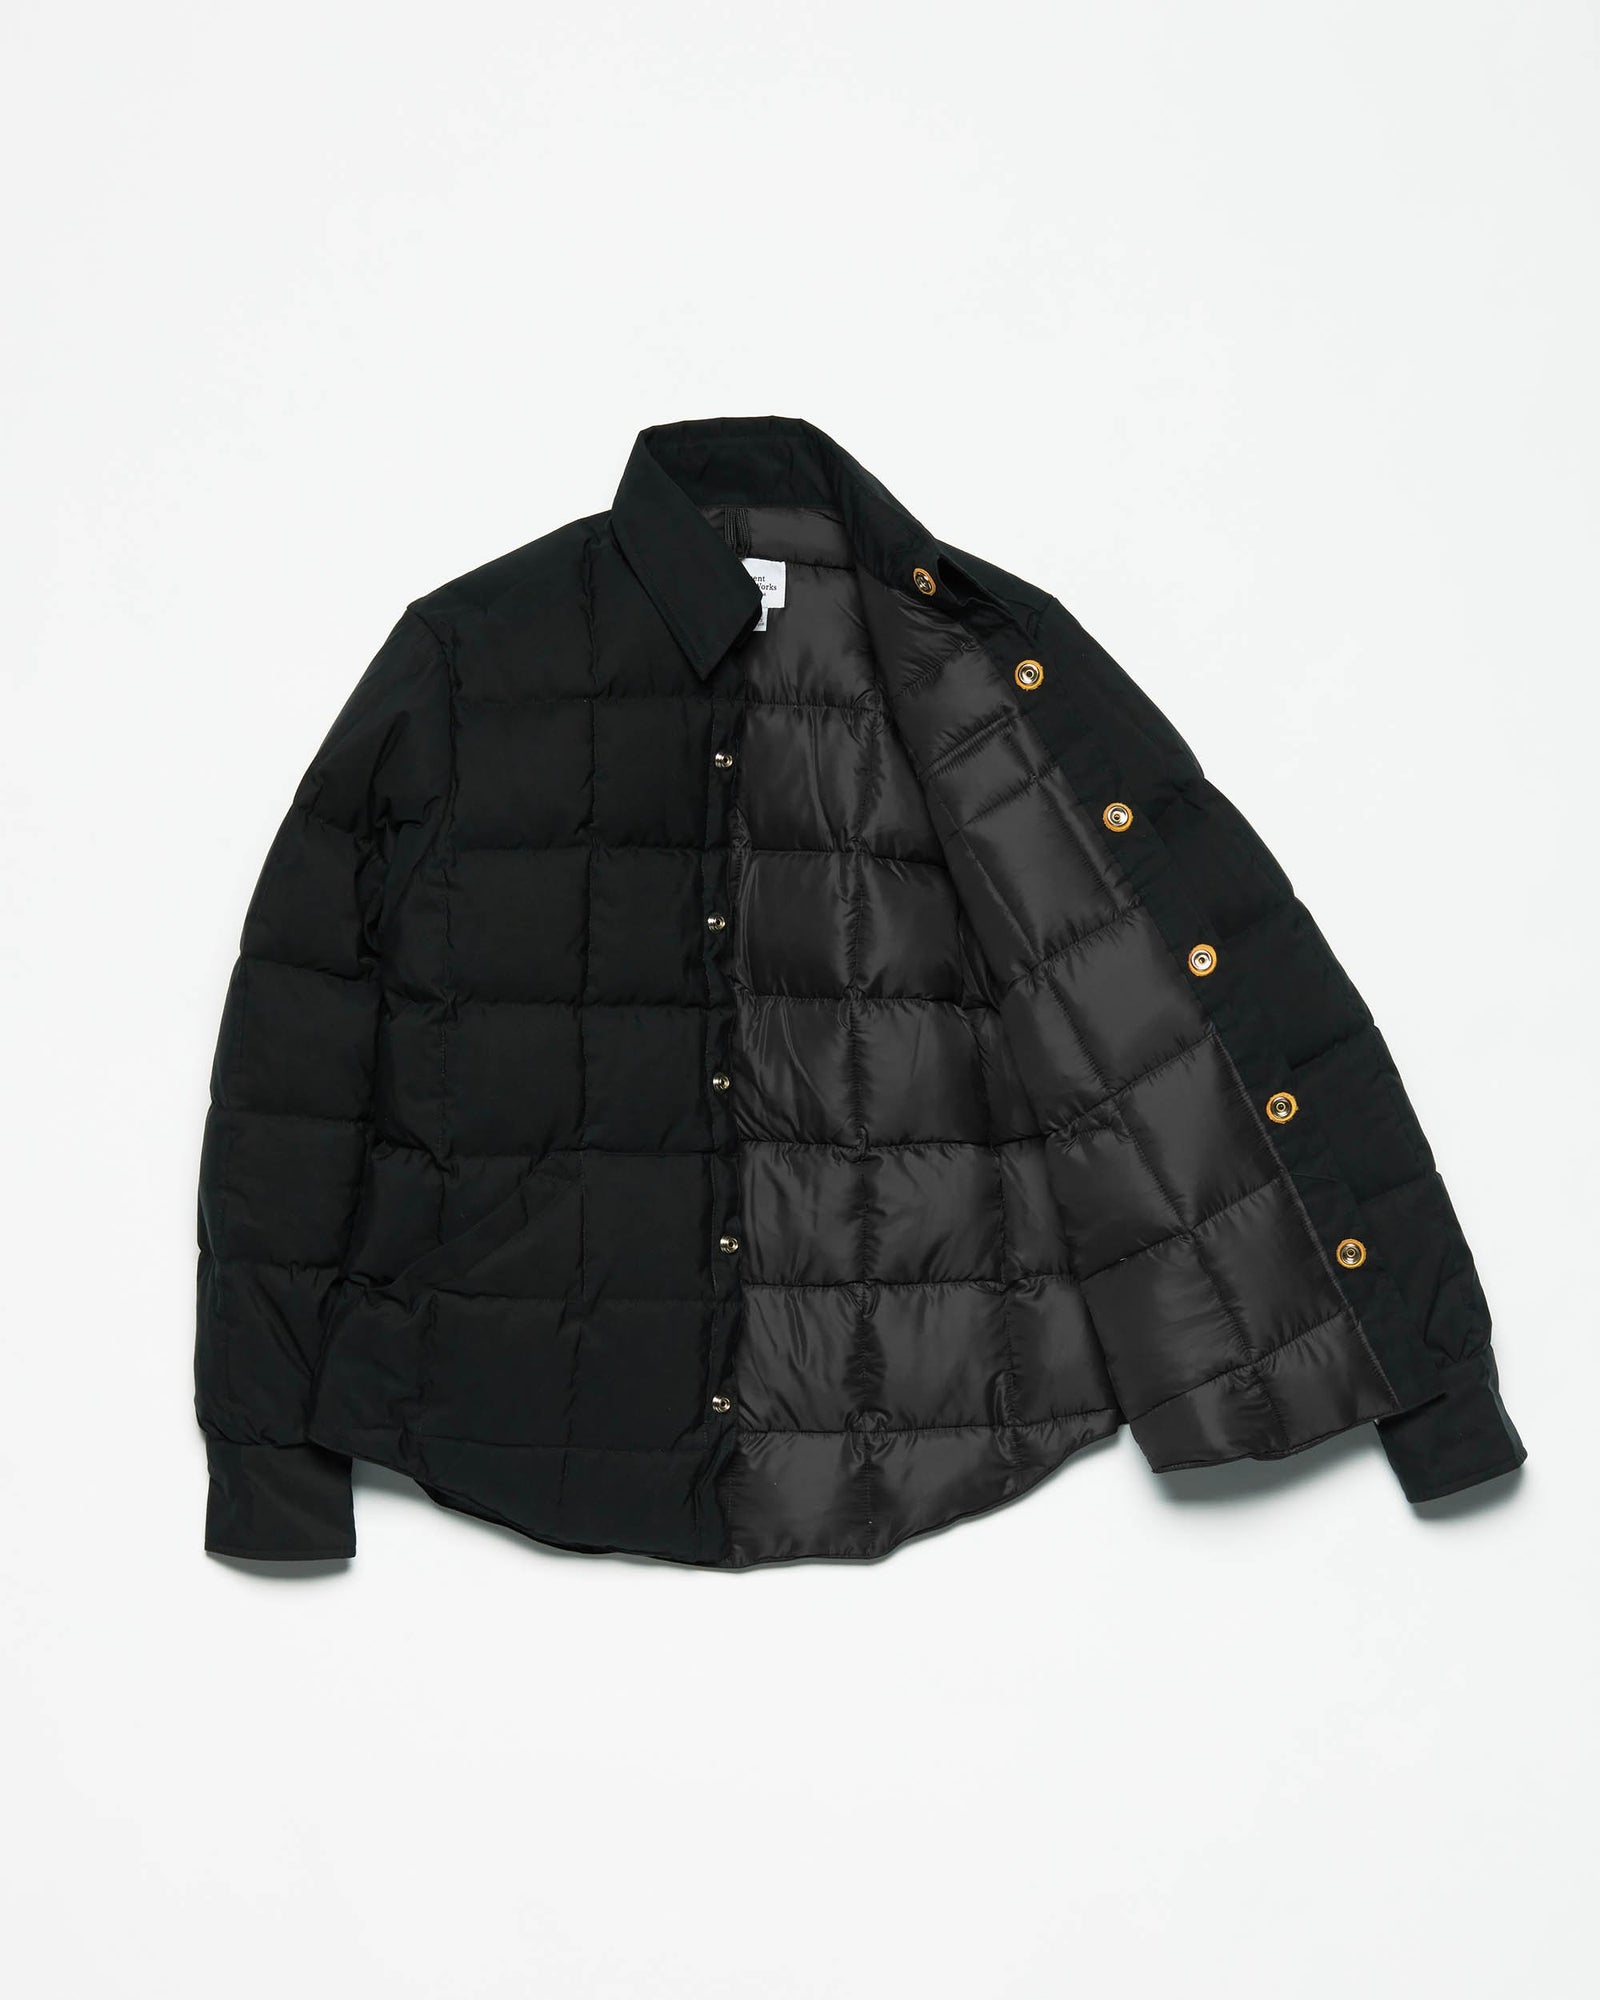 Crescent Down Works | High-Quality Down Jackets, Vests, & Accessories